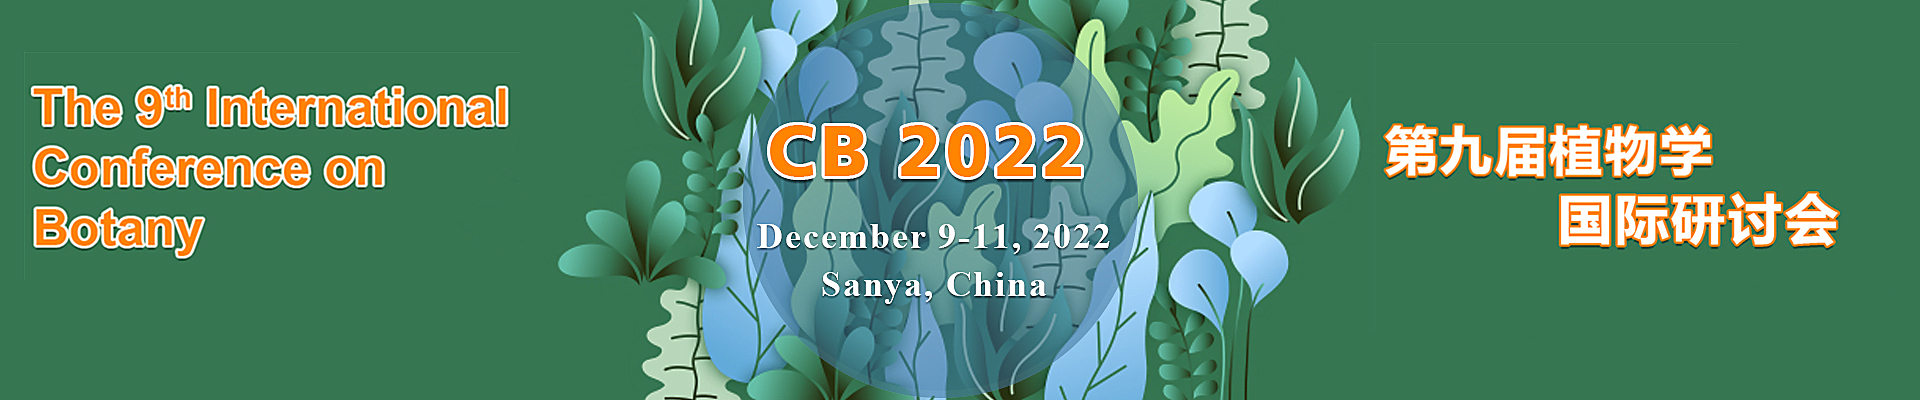 The 9th International Conference on Botany (CB 2022)